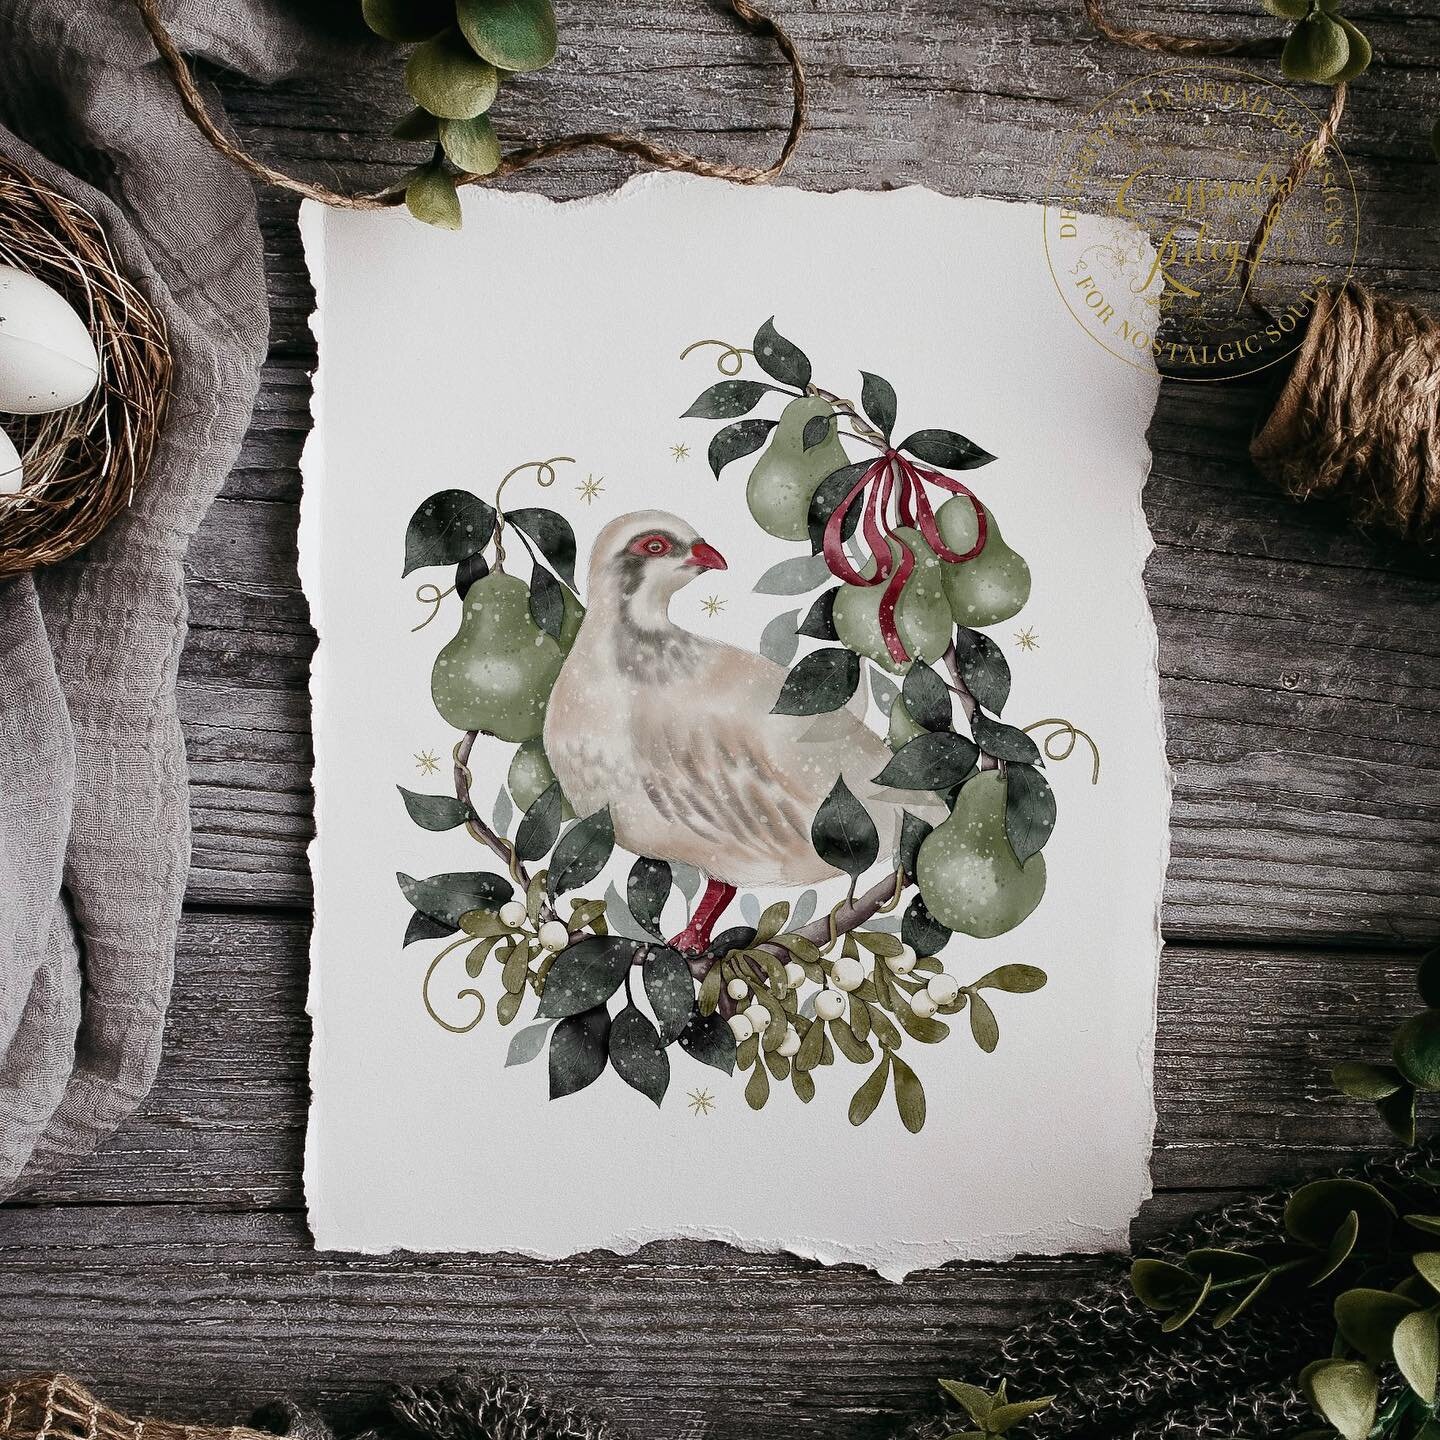 Hope you had a great weekend and a brilliant start to your week. 
🍐Today I wanted to show you my &lsquo;Partridge in a Pear Tree&rsquo; piece.
I created it to accompany my &lsquo;Two Turtle Doves&rsquo; illustration which I created during the #jehan